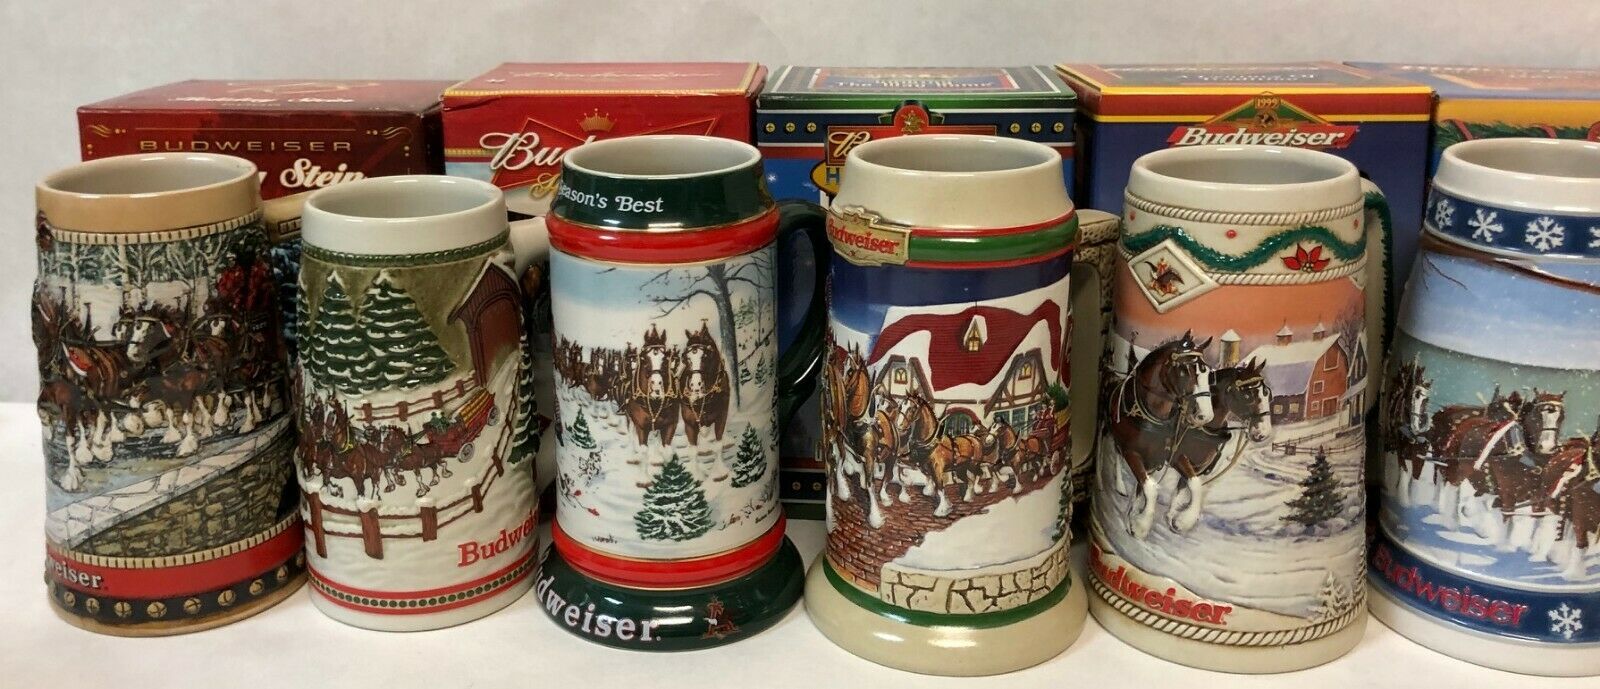 COMPLETE SET of Budweiser Holiday Steins 19802018 PLUS Two LimEd